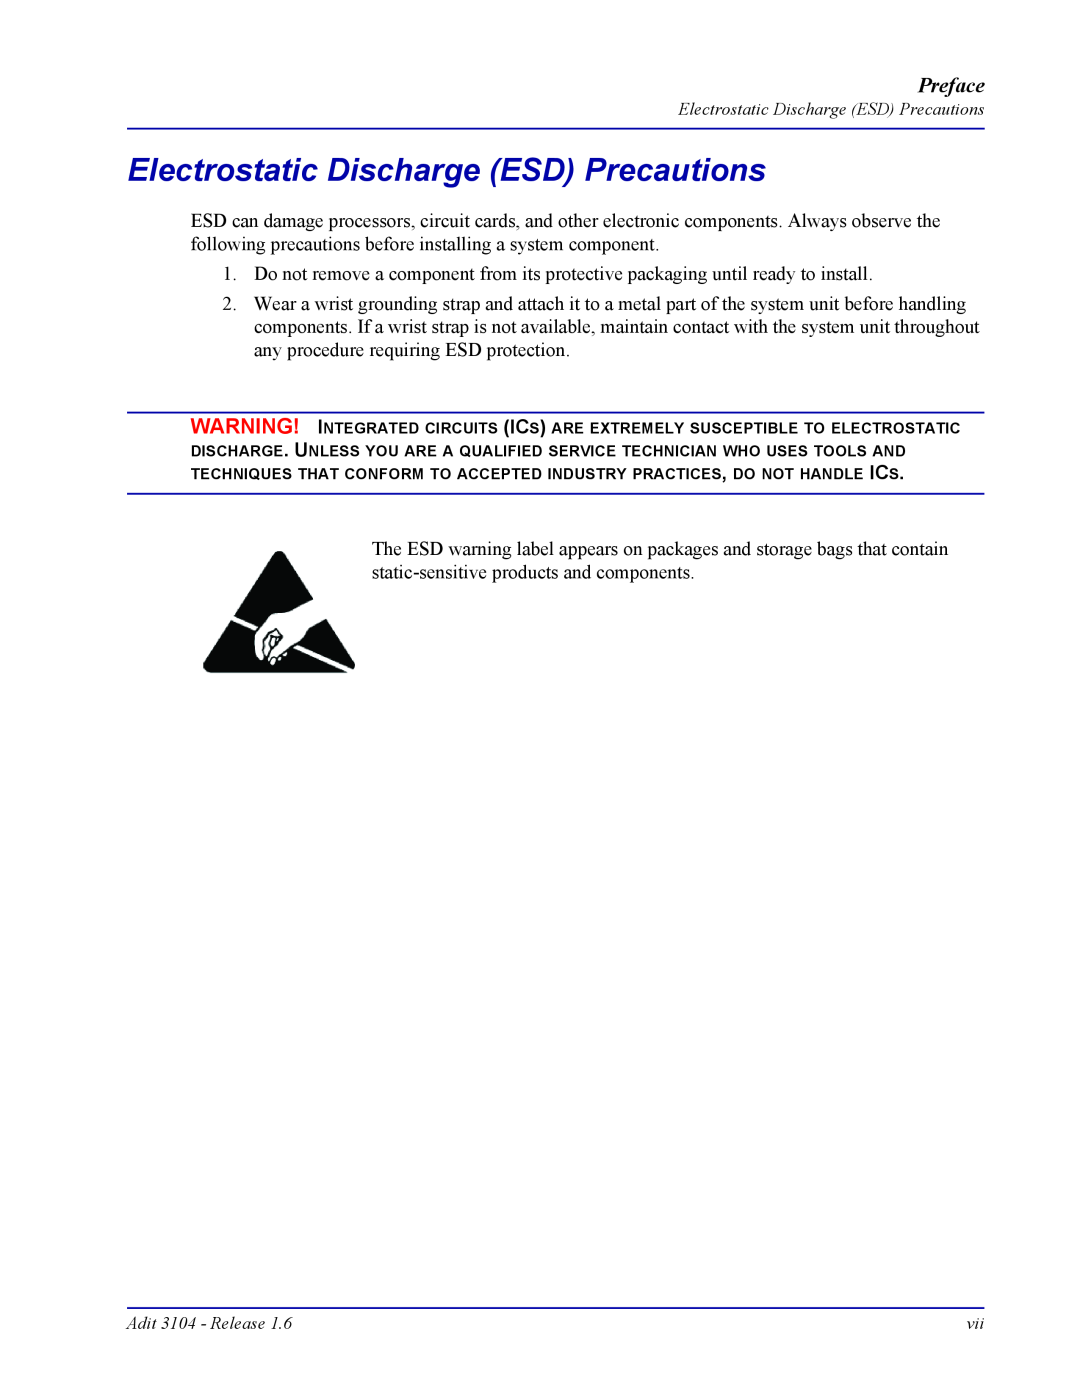 Carrier Access Adit 3104 user manual Electrostatic Discharge ESD Precautions, Preface 